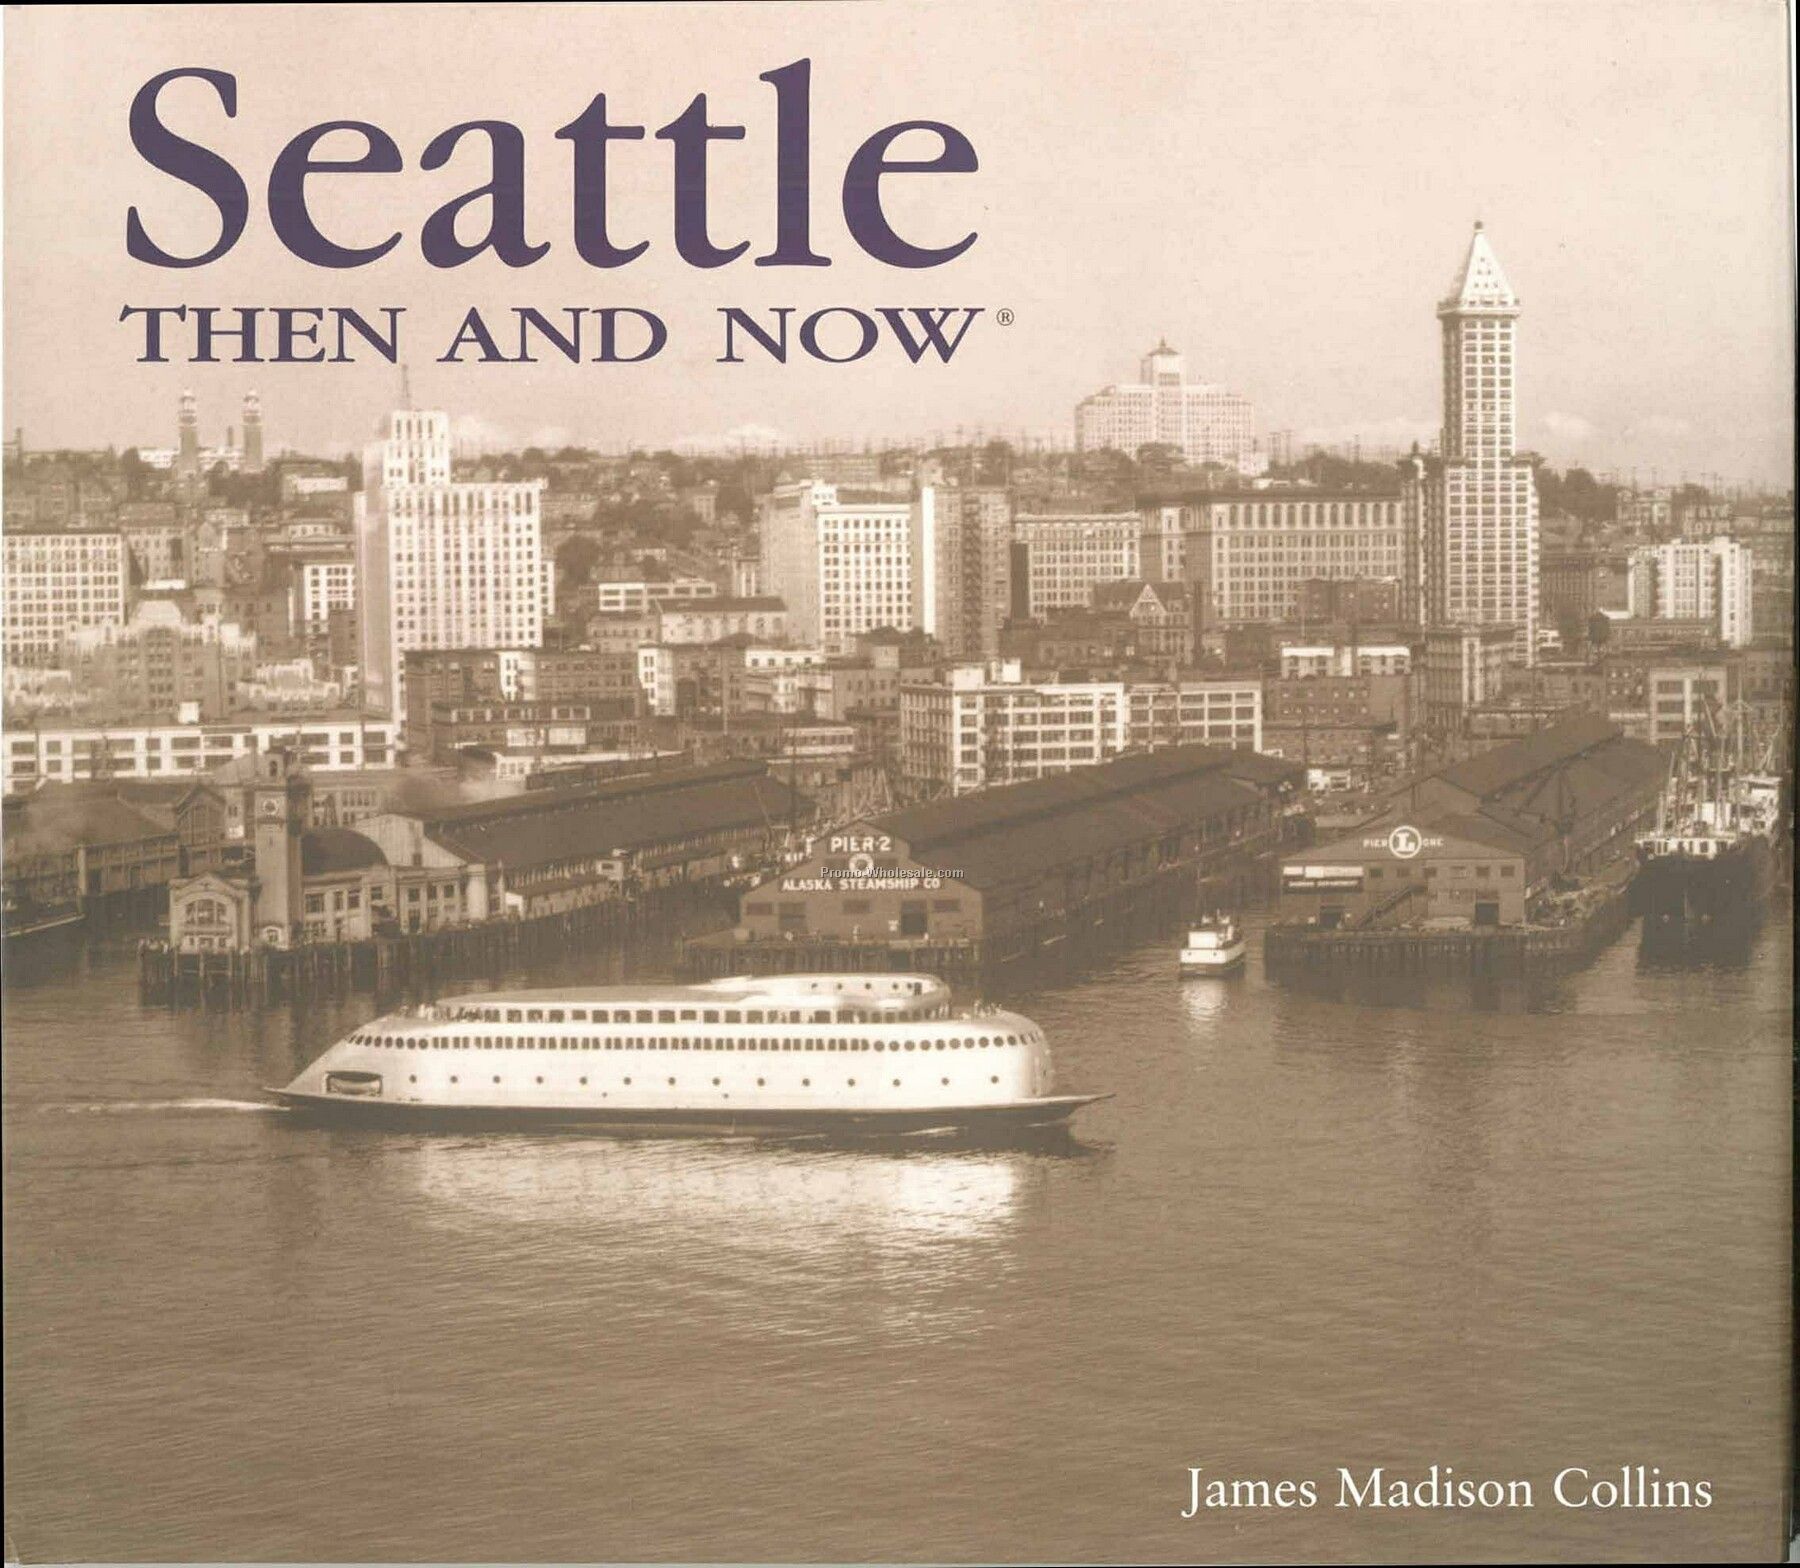 Seattle Then & Now City Series Book - Hardcover Edition